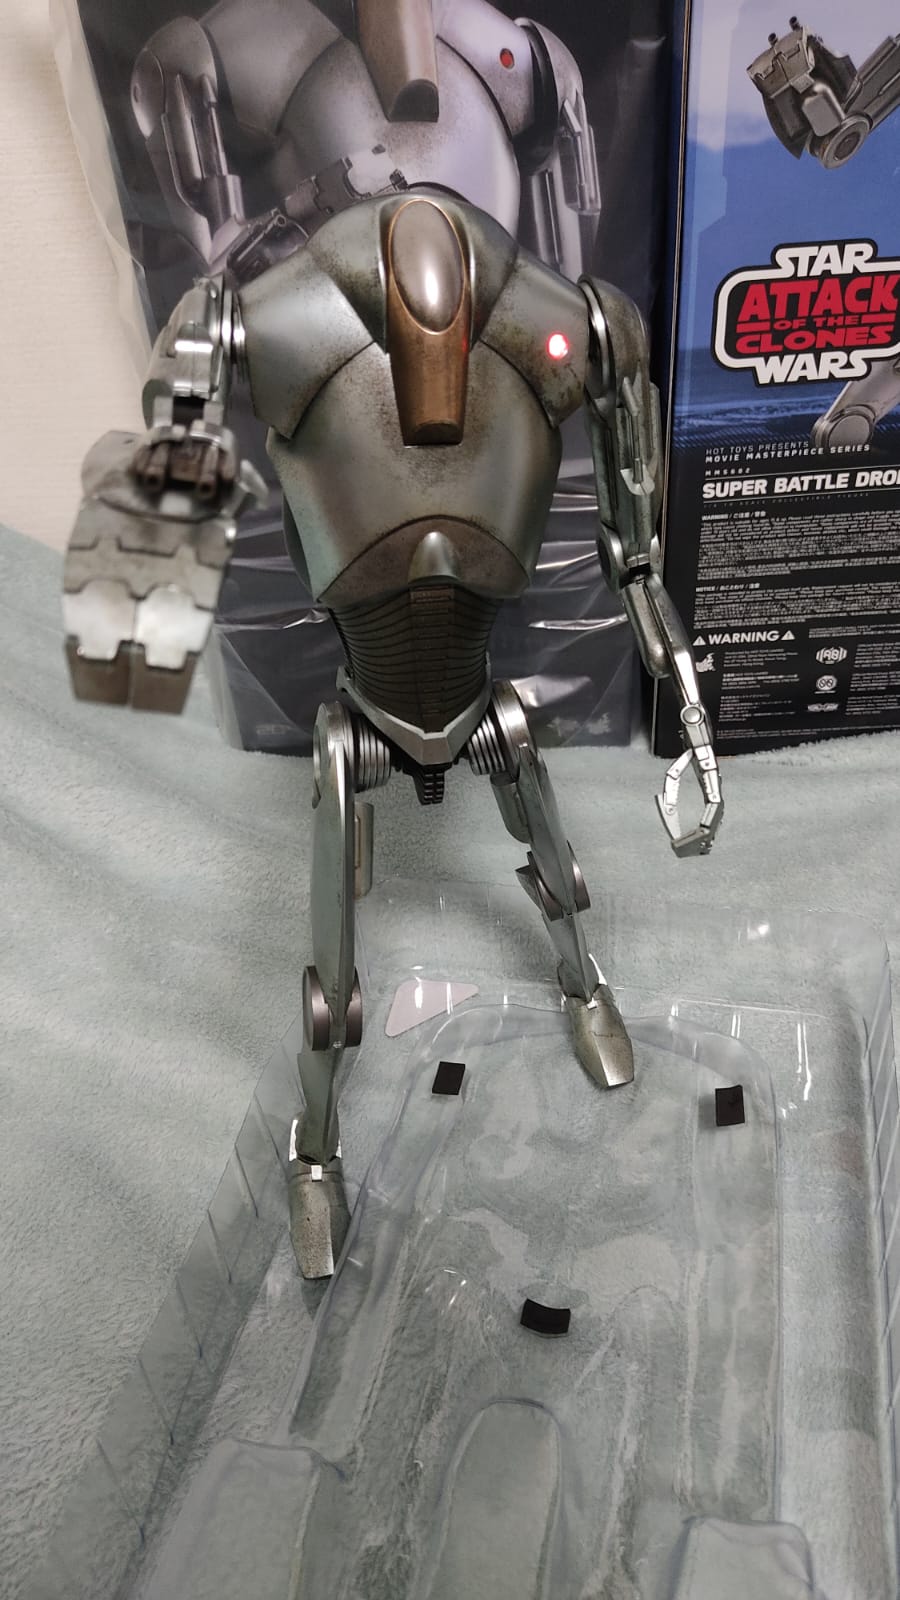 StarWars - NEW PRODUCT: HOT TOYS: STAR WARS EPISODE II: ATTACK OF THE CLONES™ SUPER BATTLE DROID™ 1/6TH SCALE COLLECTIBLE FIGURE Whats162